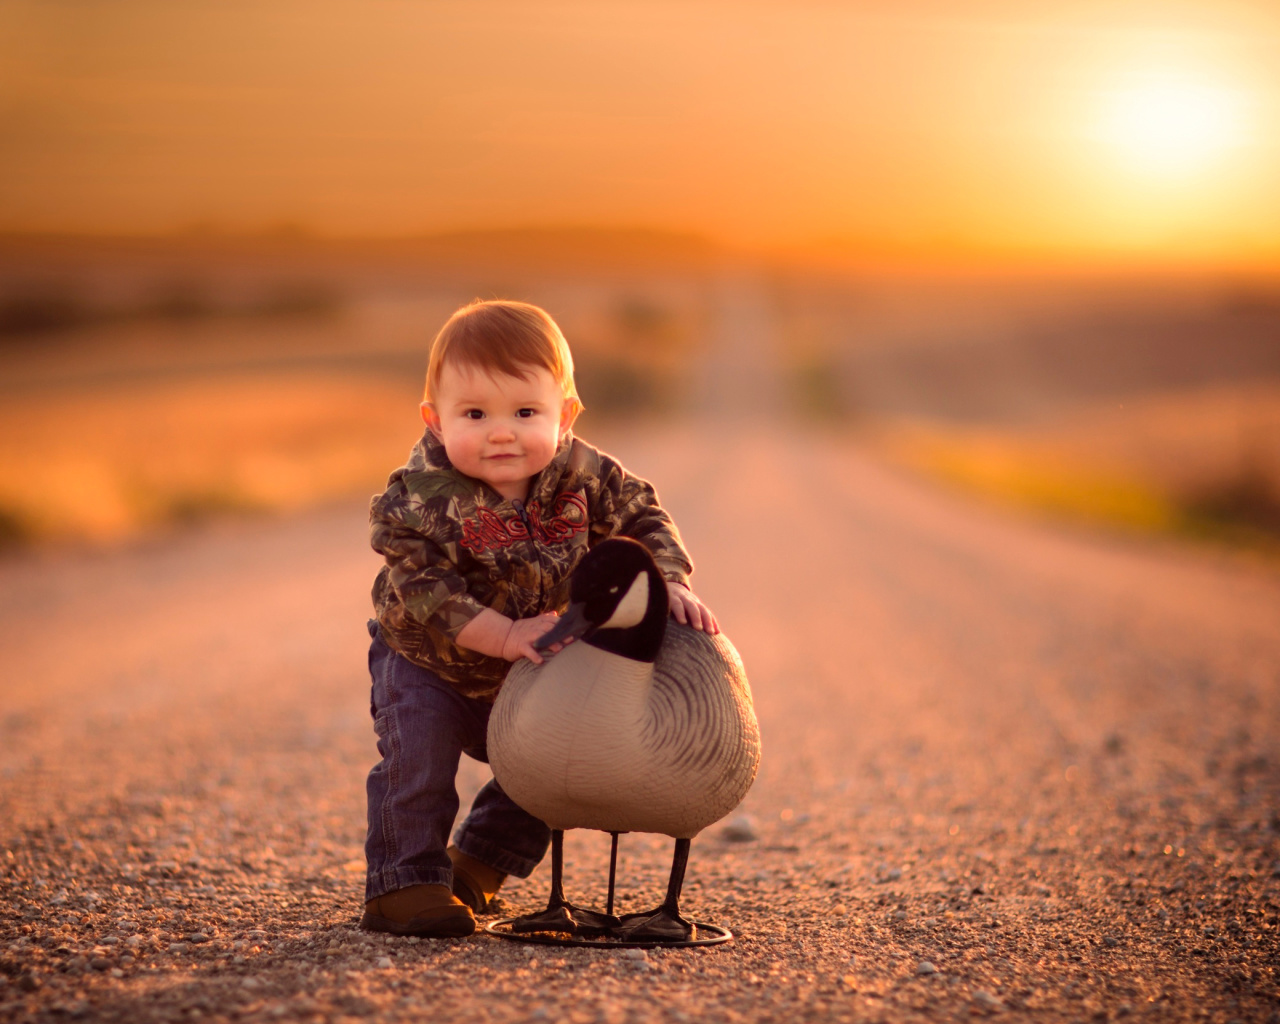 Kid and Duck wallpaper 1280x1024